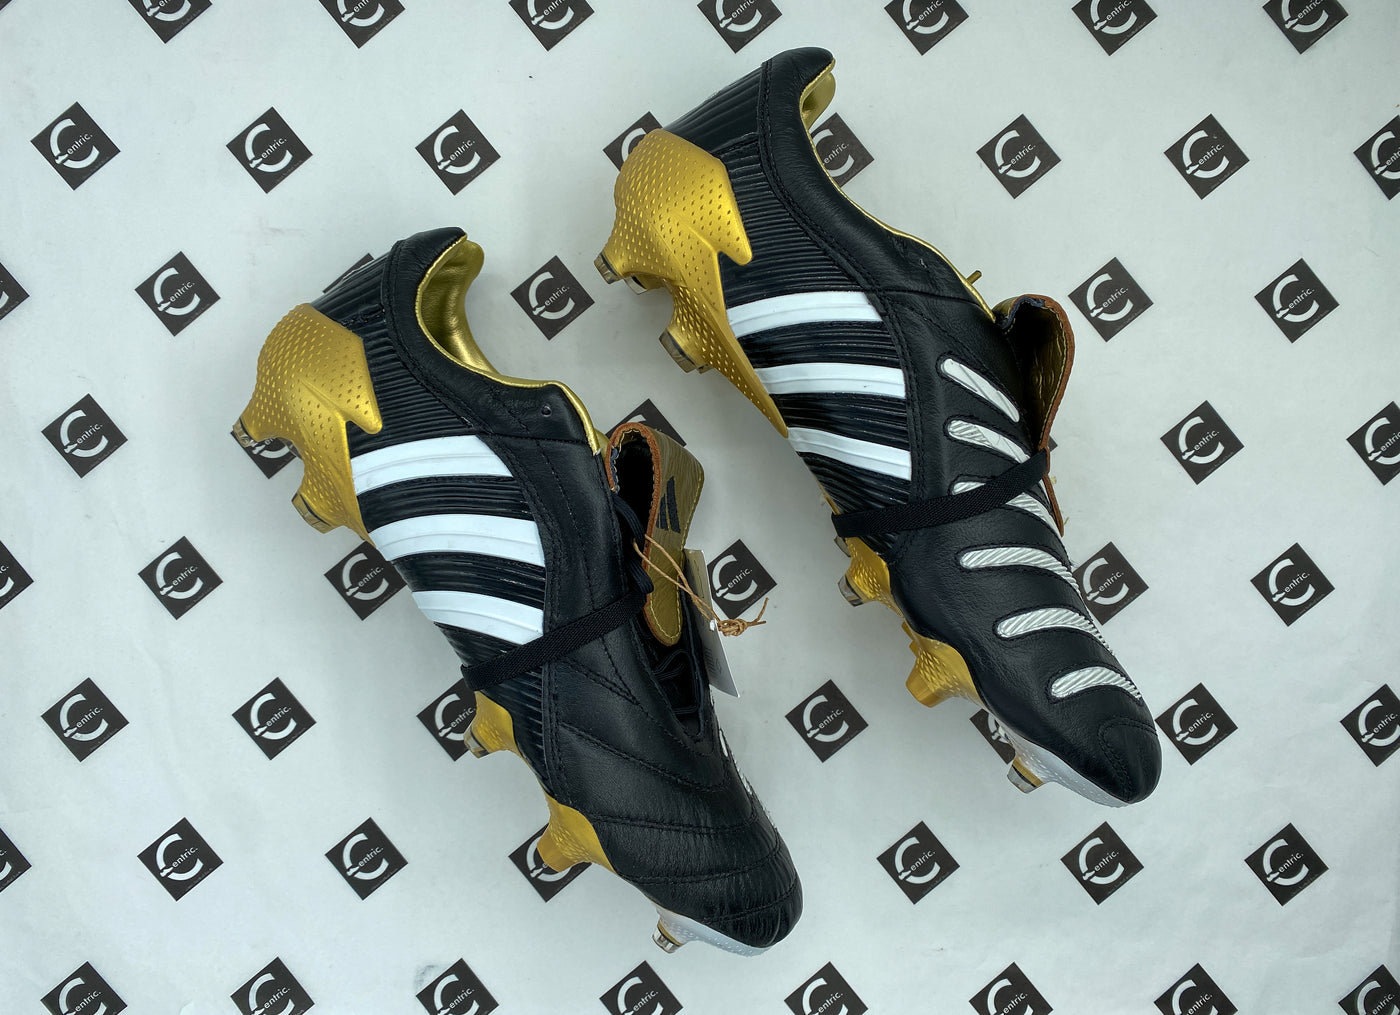 Adidas Predator Pulse x EA Sports "Legends Pack" Remake FG GOLD - Bootscentric